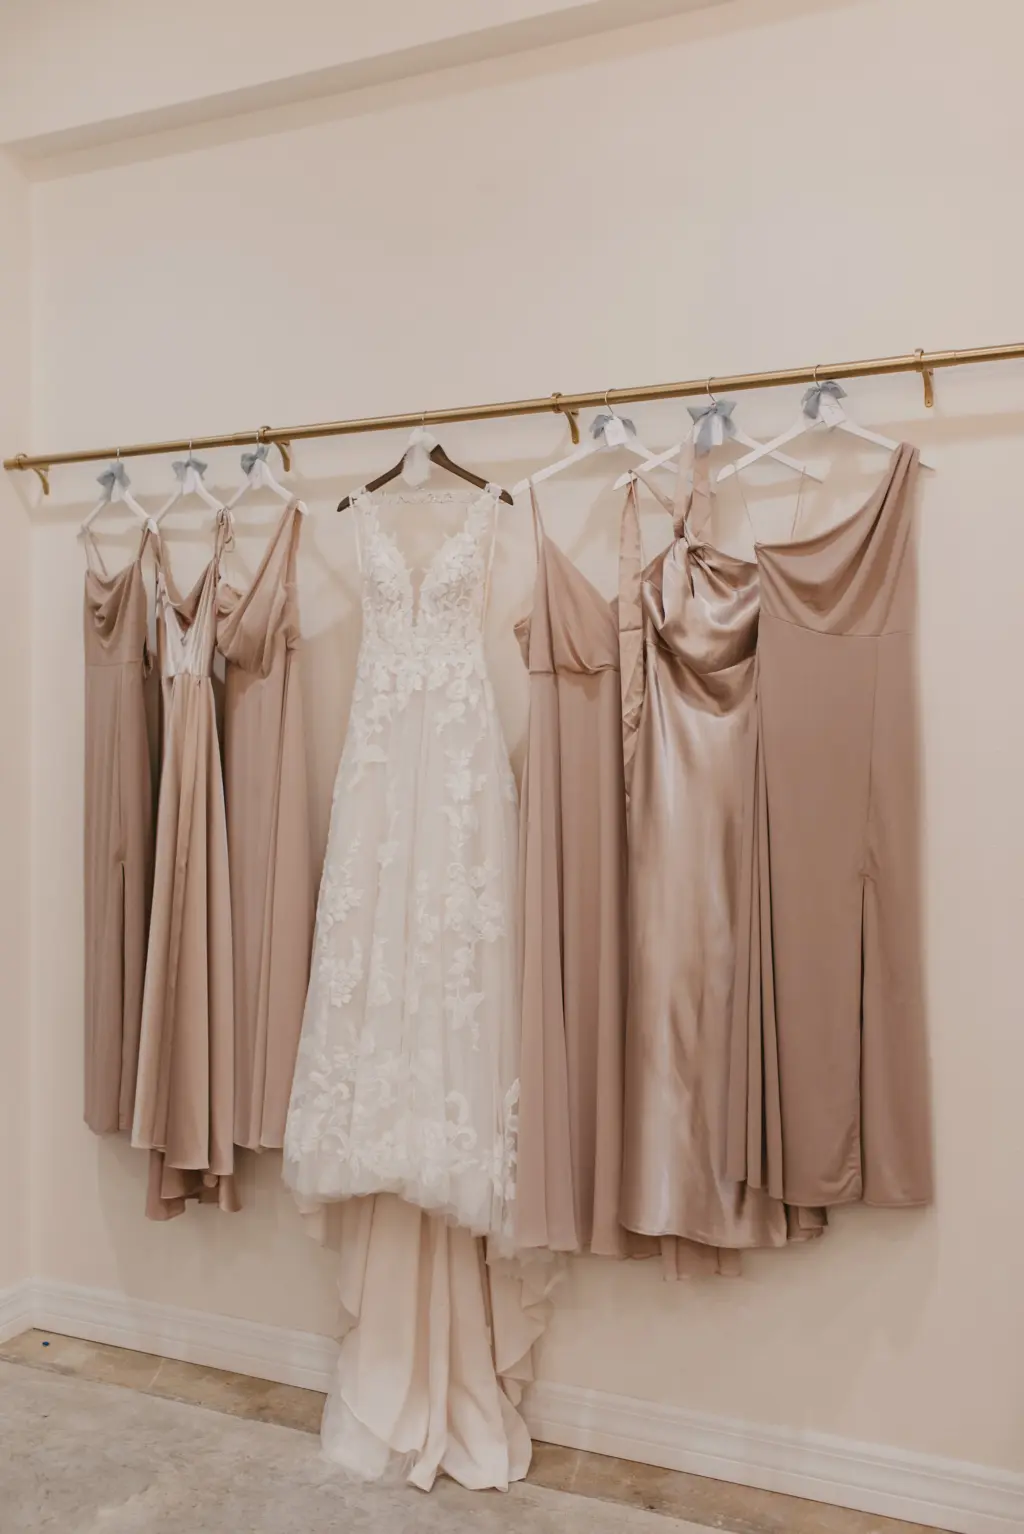 Neutral Beige Taupe Mismatched Chiffon and Satin Bridesmaids Dresses | White Open Back Lace and Tulle Lillian West Wedding Dress with Maggie Sottero Veil Inspiration